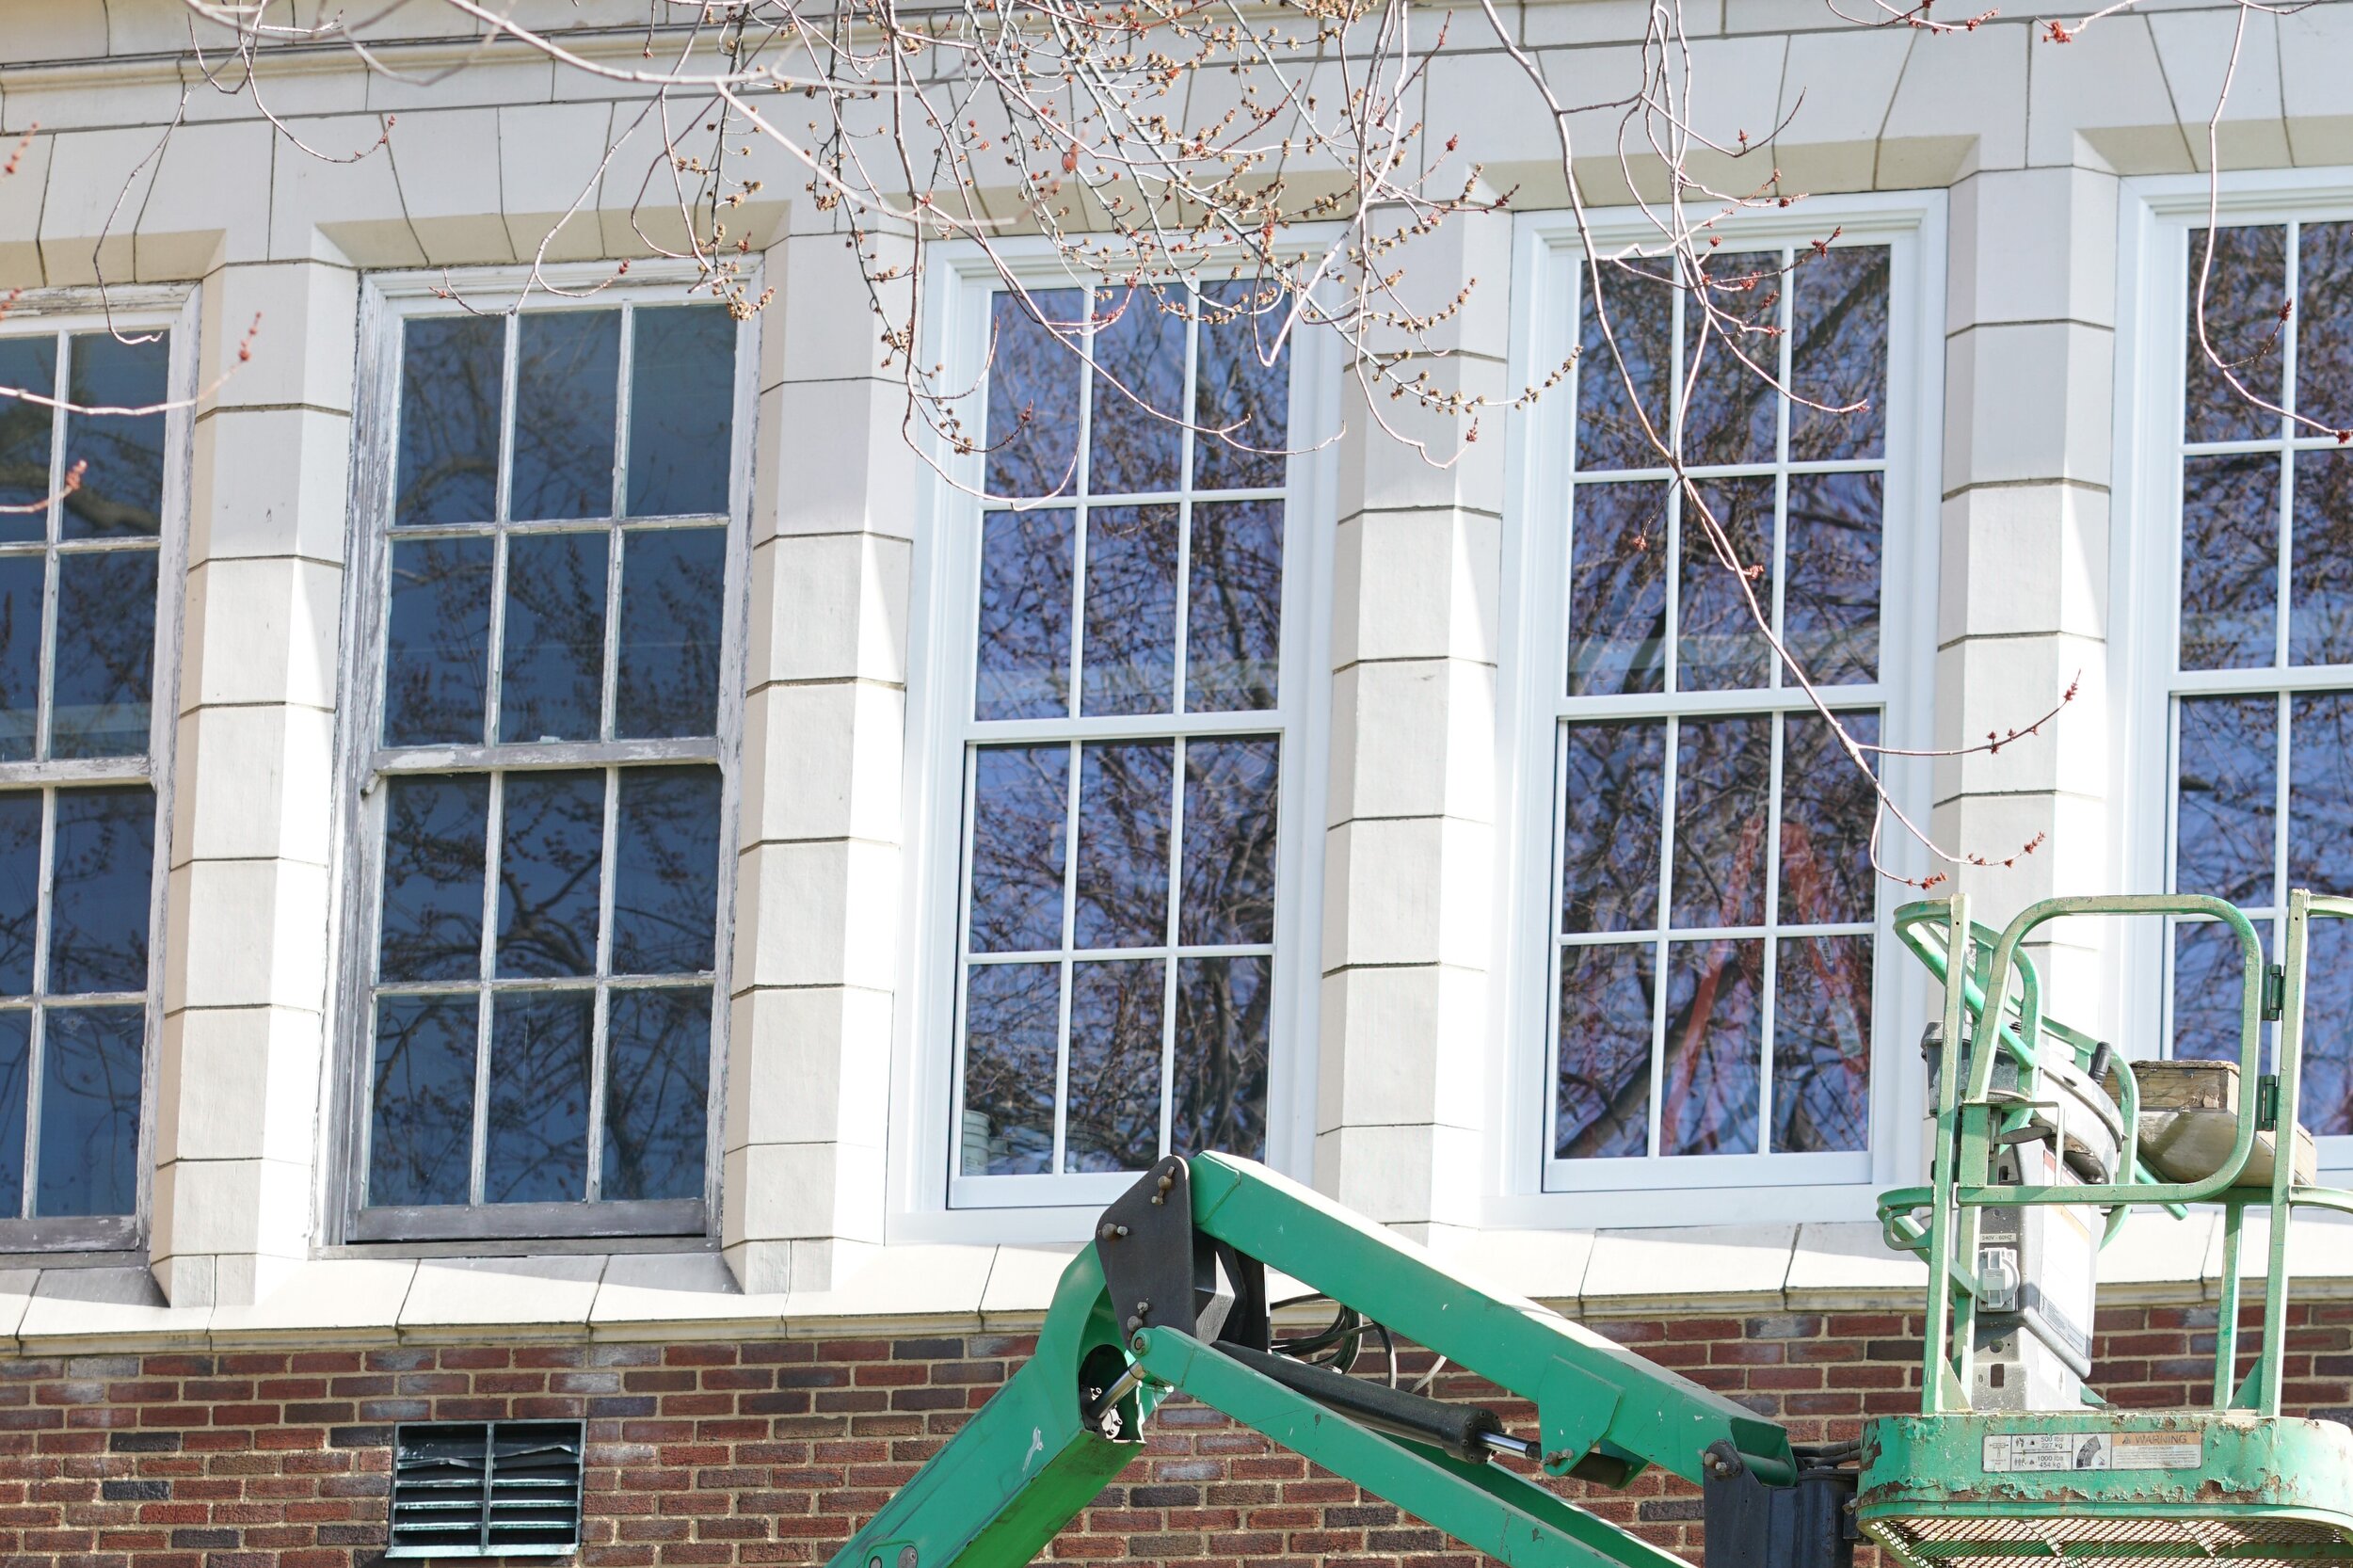 New Windows Being InstalledMarch 25, 2021 - Our new windows have arrived and are being installed along the North side of Shore Cultural Centre.  Stop by to see the improvements.  We are still accepting donations to finish the work along the Babbitt Road Side.  Visit our Support Shore page for information on how to donate.Photo:  Parkerfotos.com